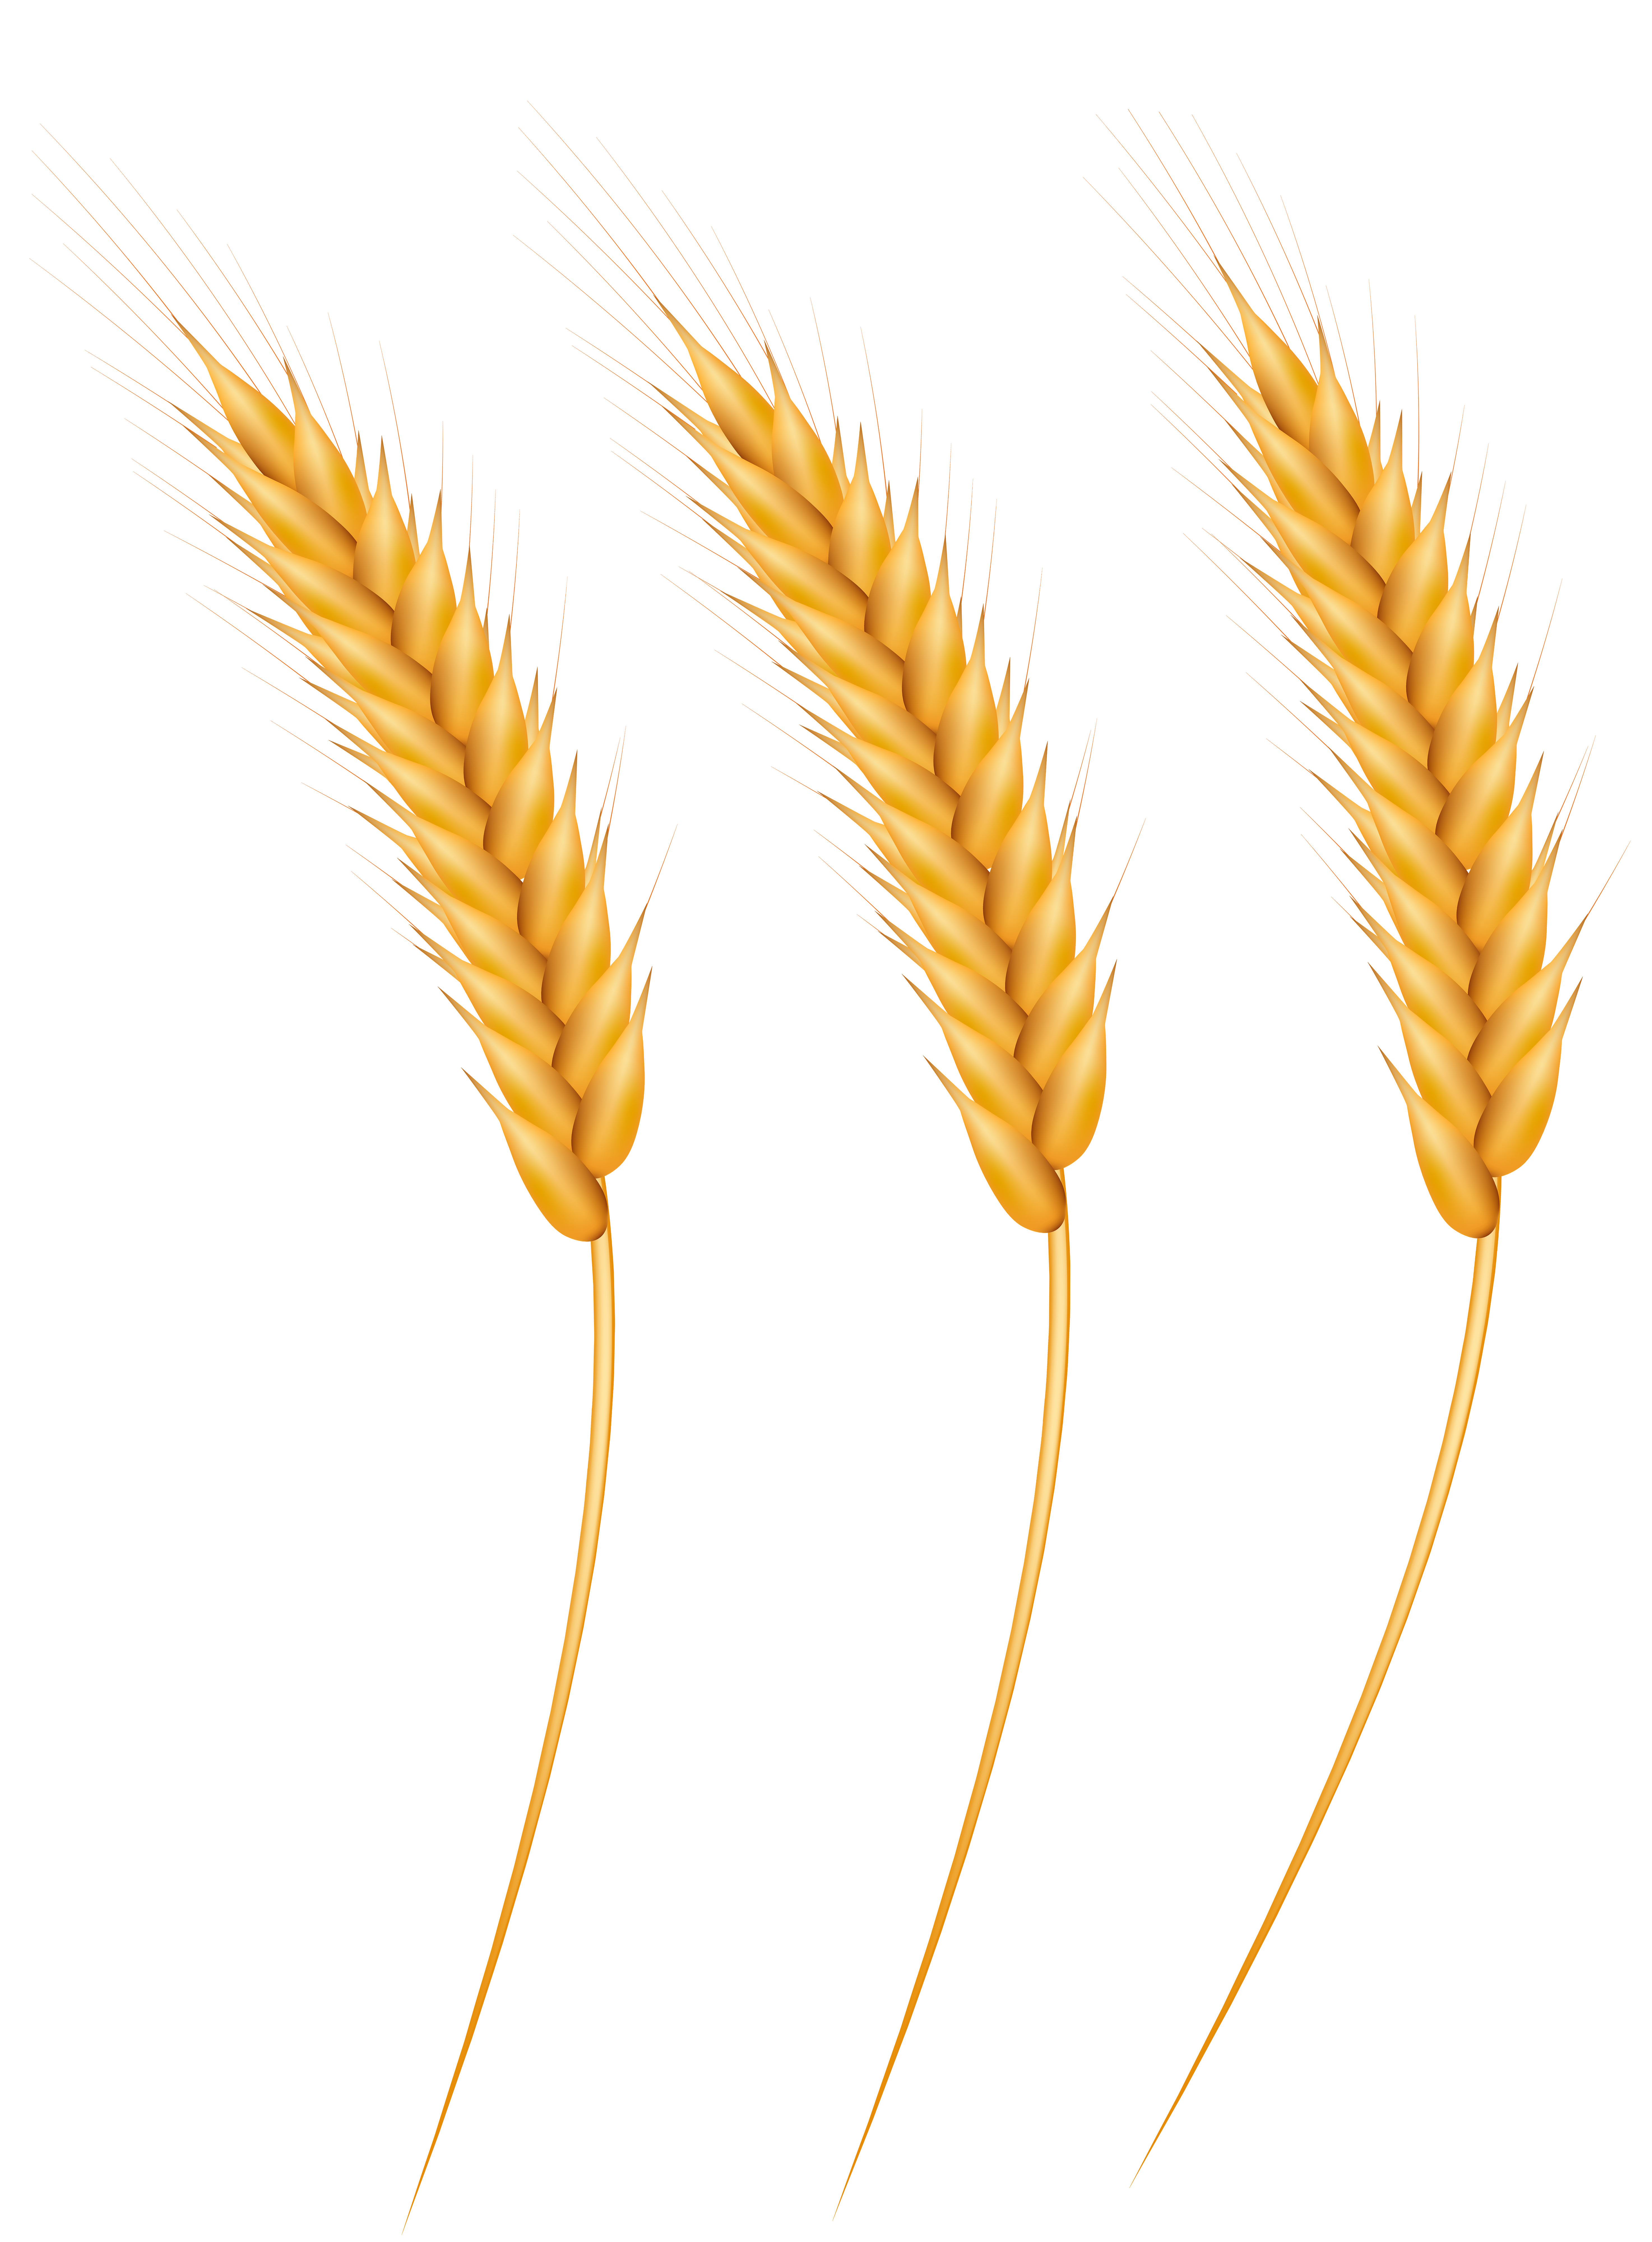 Wheat Grains PNG Clip Art Image | Gallery Yopriceville - High-Quality